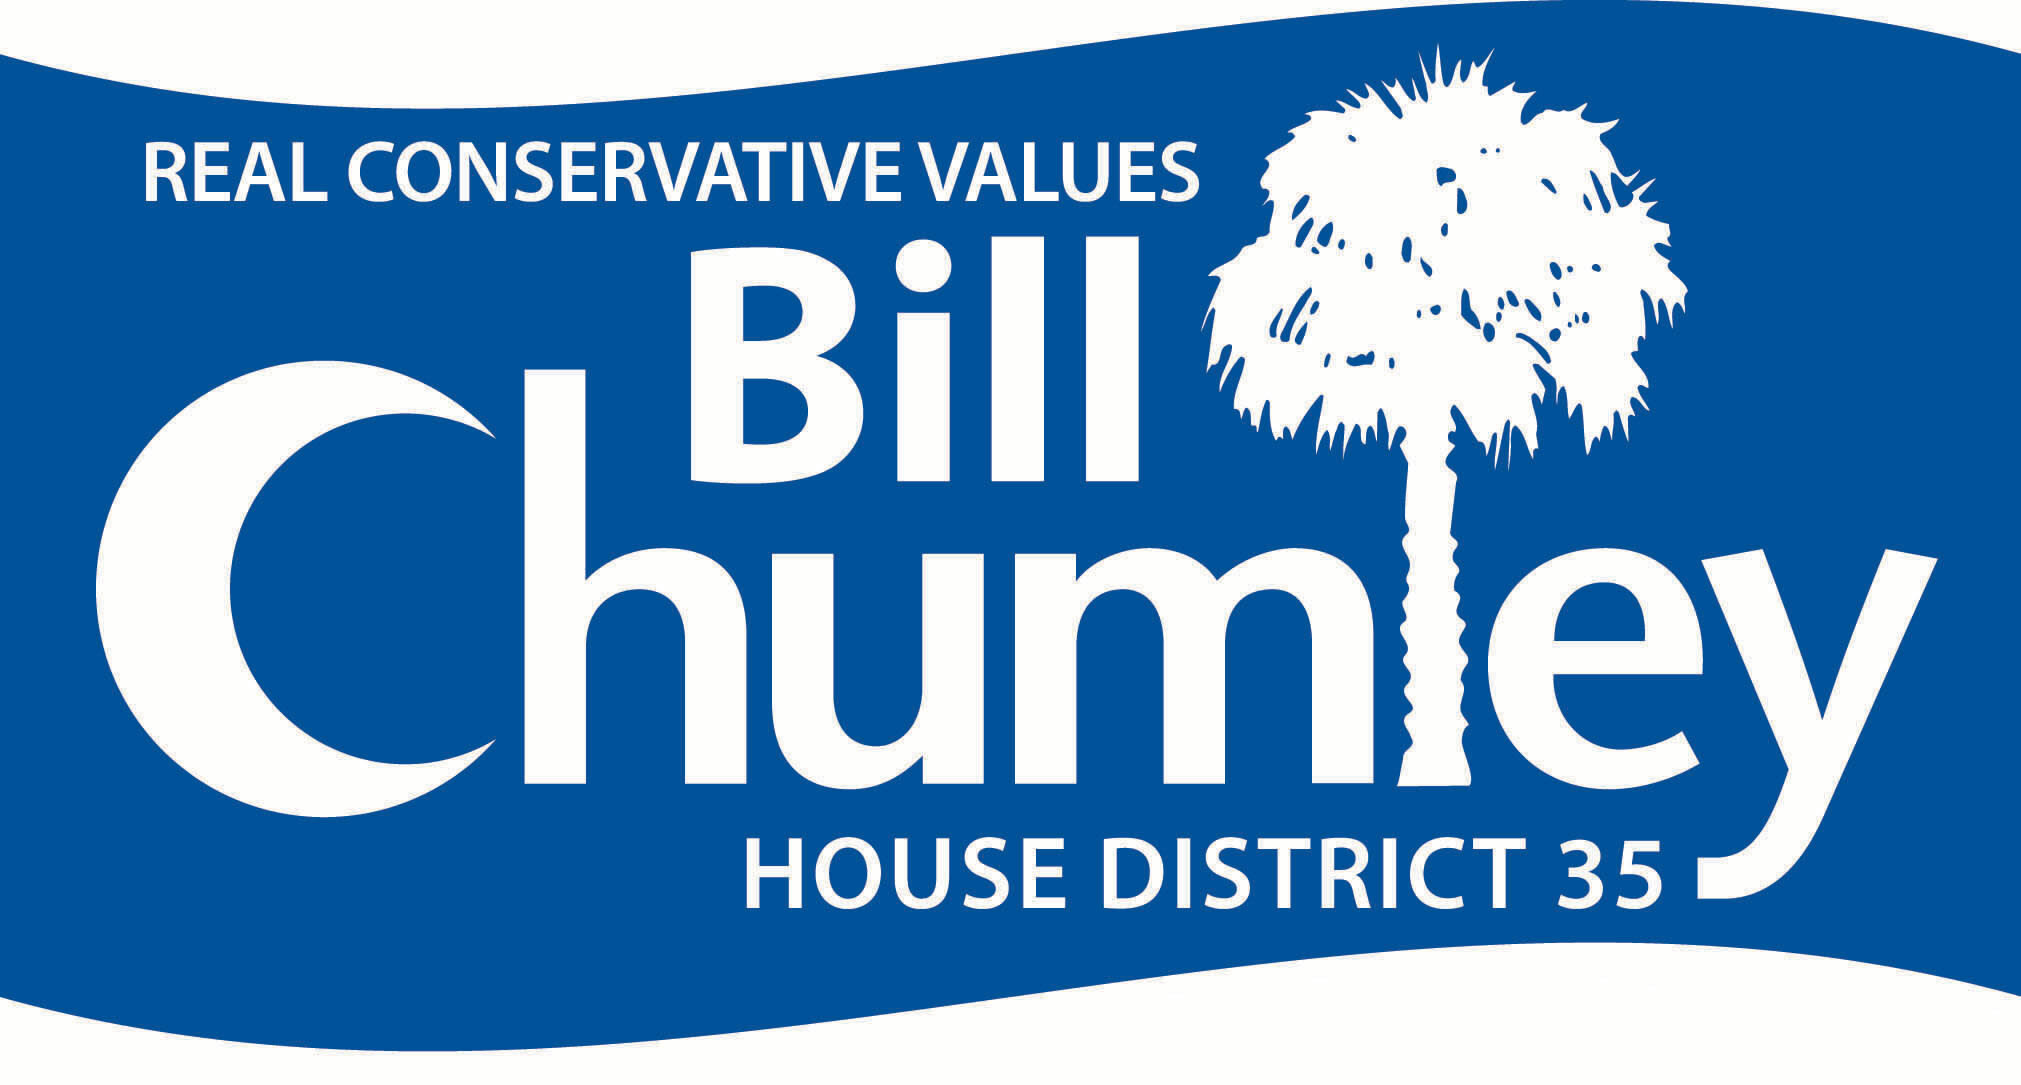 Chumley for House